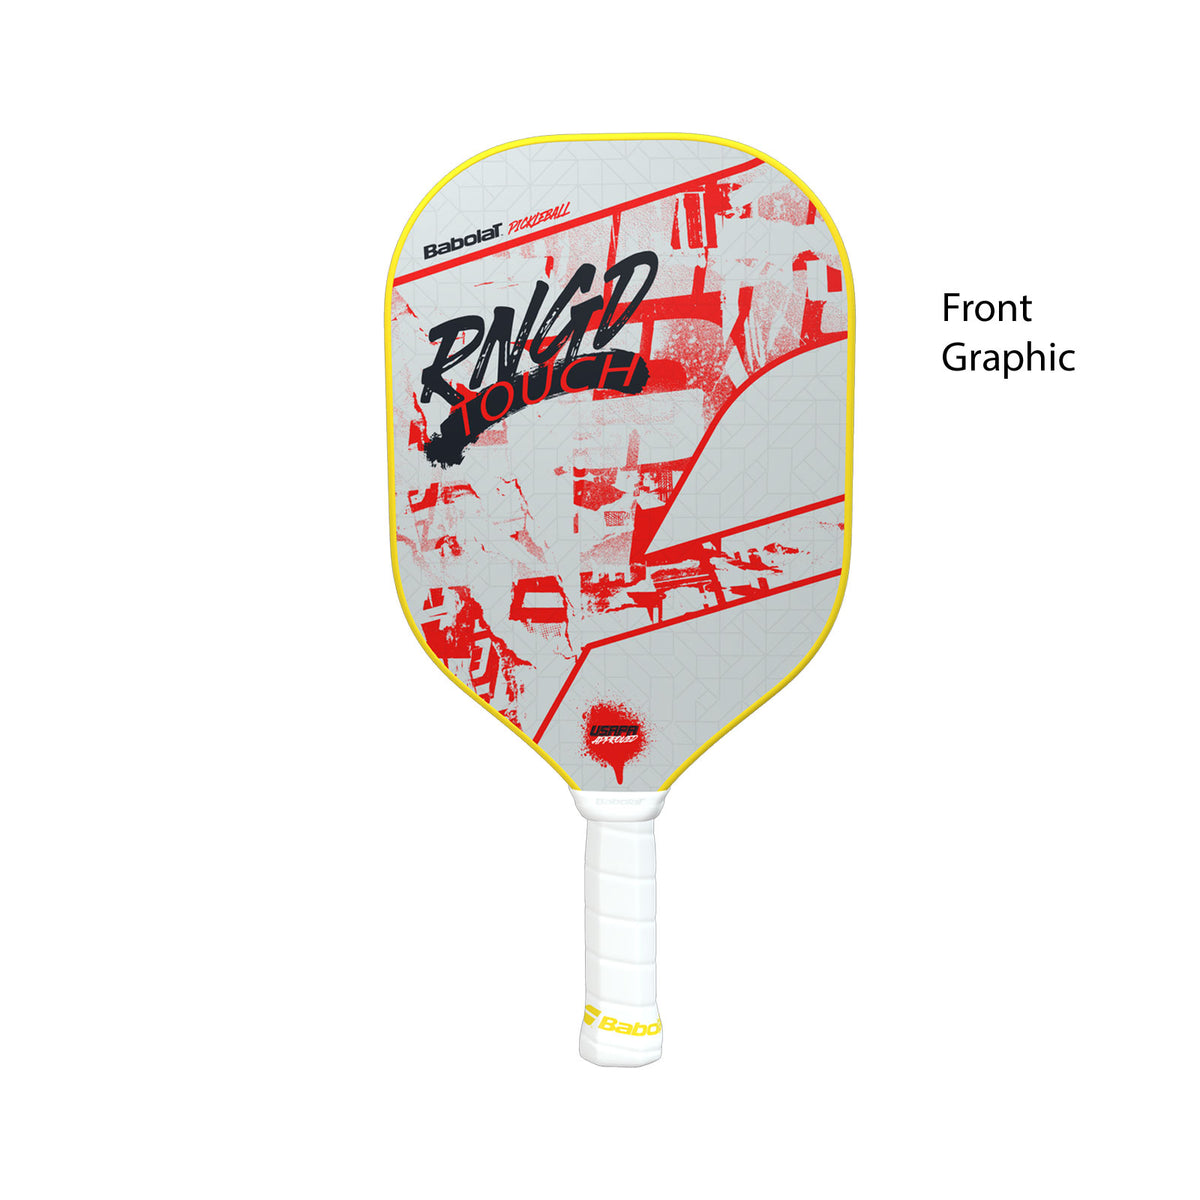 Babolat Touch VS 17 — Racquet Science